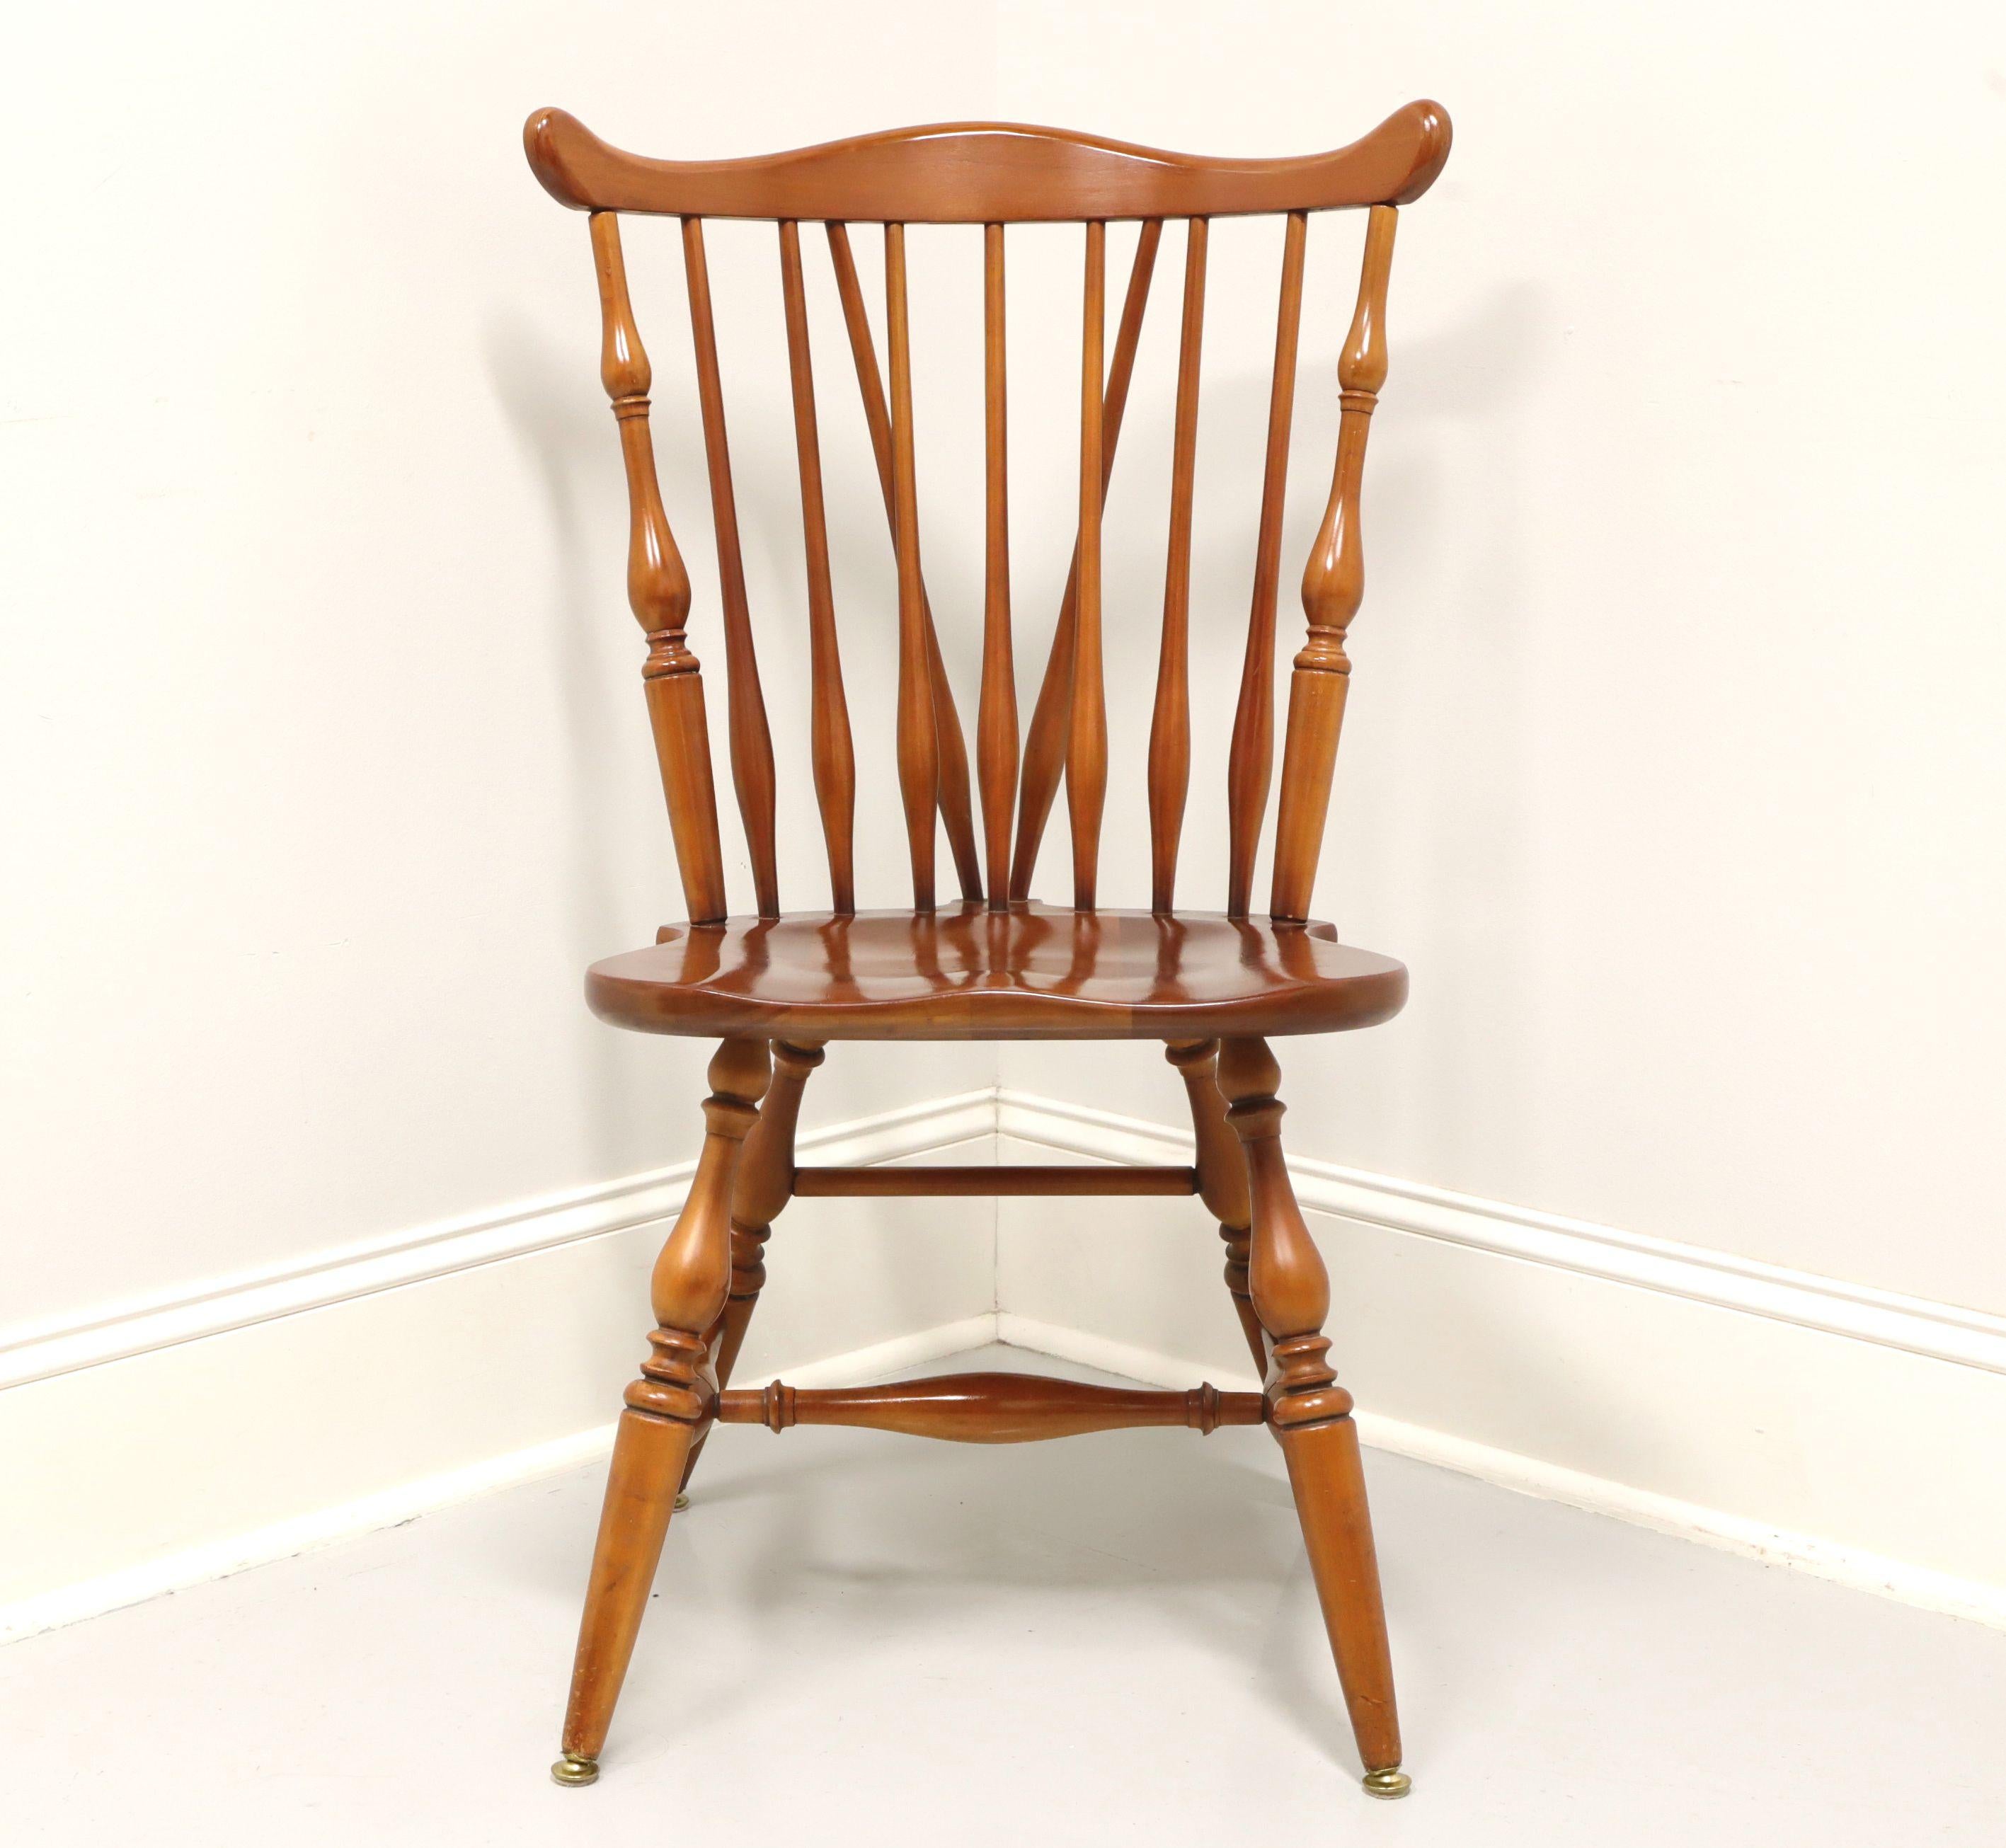 A Windsor style dining side chair by Ethan Allen, their Duxbury. Solid maple, fiddleback with turned side spindles, saddle shape seat, tail-supports with spindles, turned legs and stretchers. Made in the USA, in the mid 20th Century.

Style #: